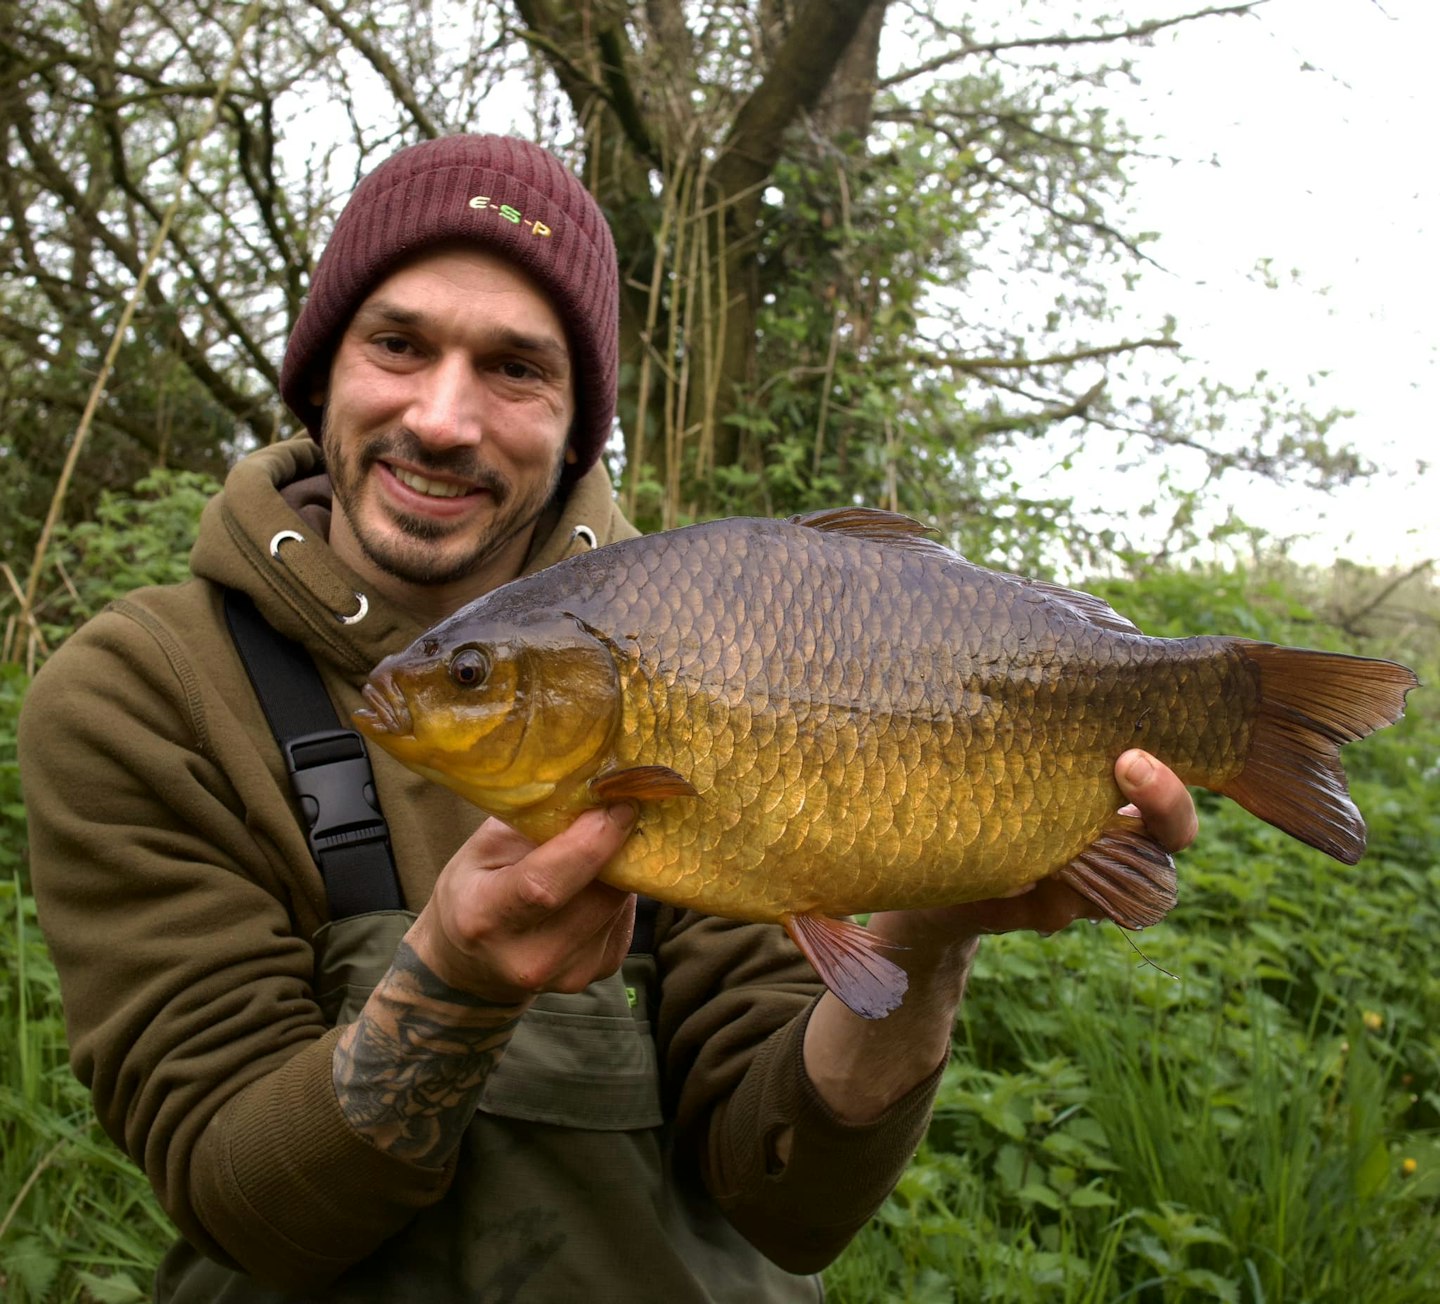 Crucian carp like this can be caught using a method feeder.